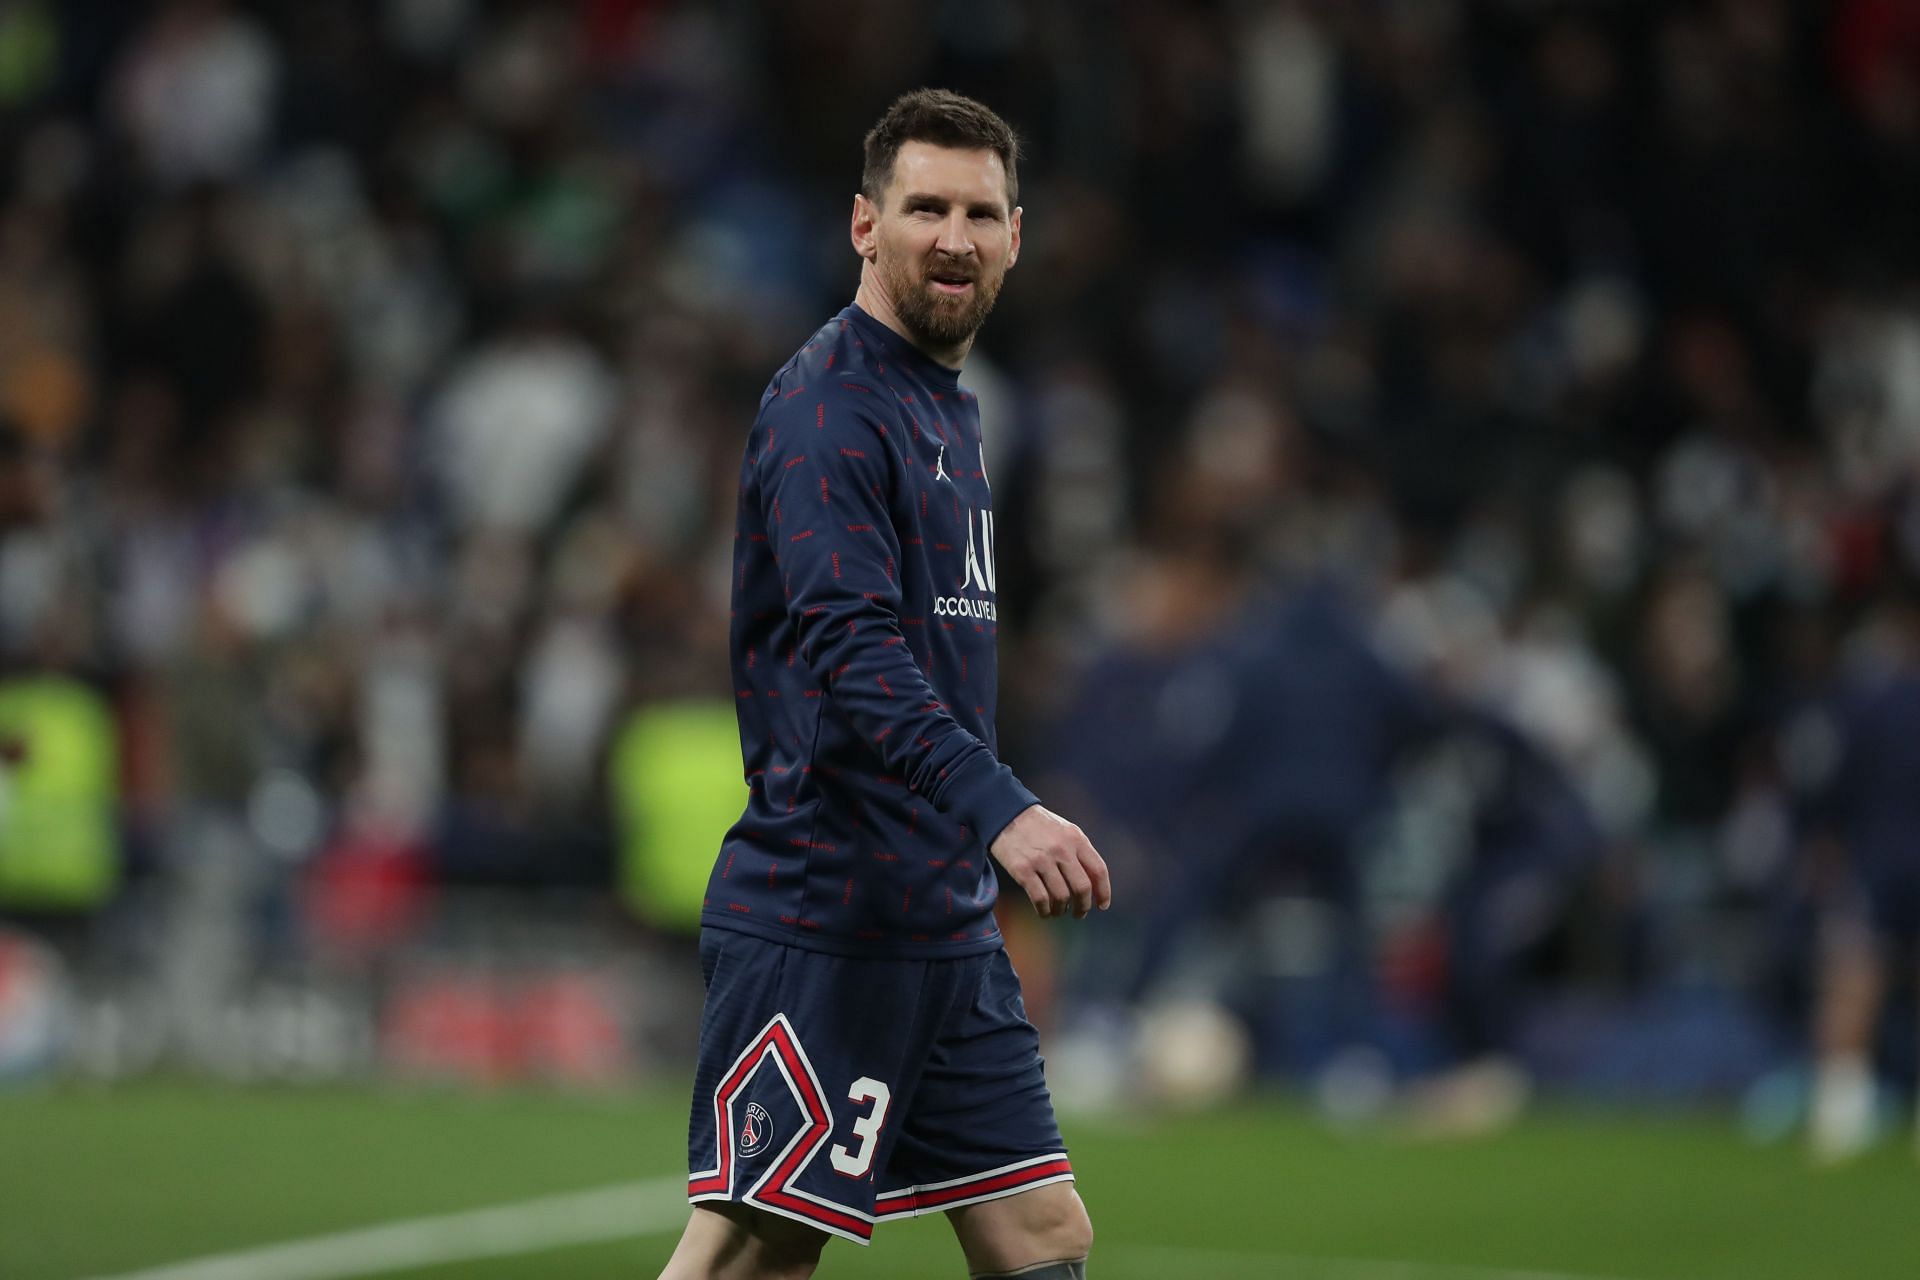 Lionel Messi has won the Ligue 1 title in his debut season.